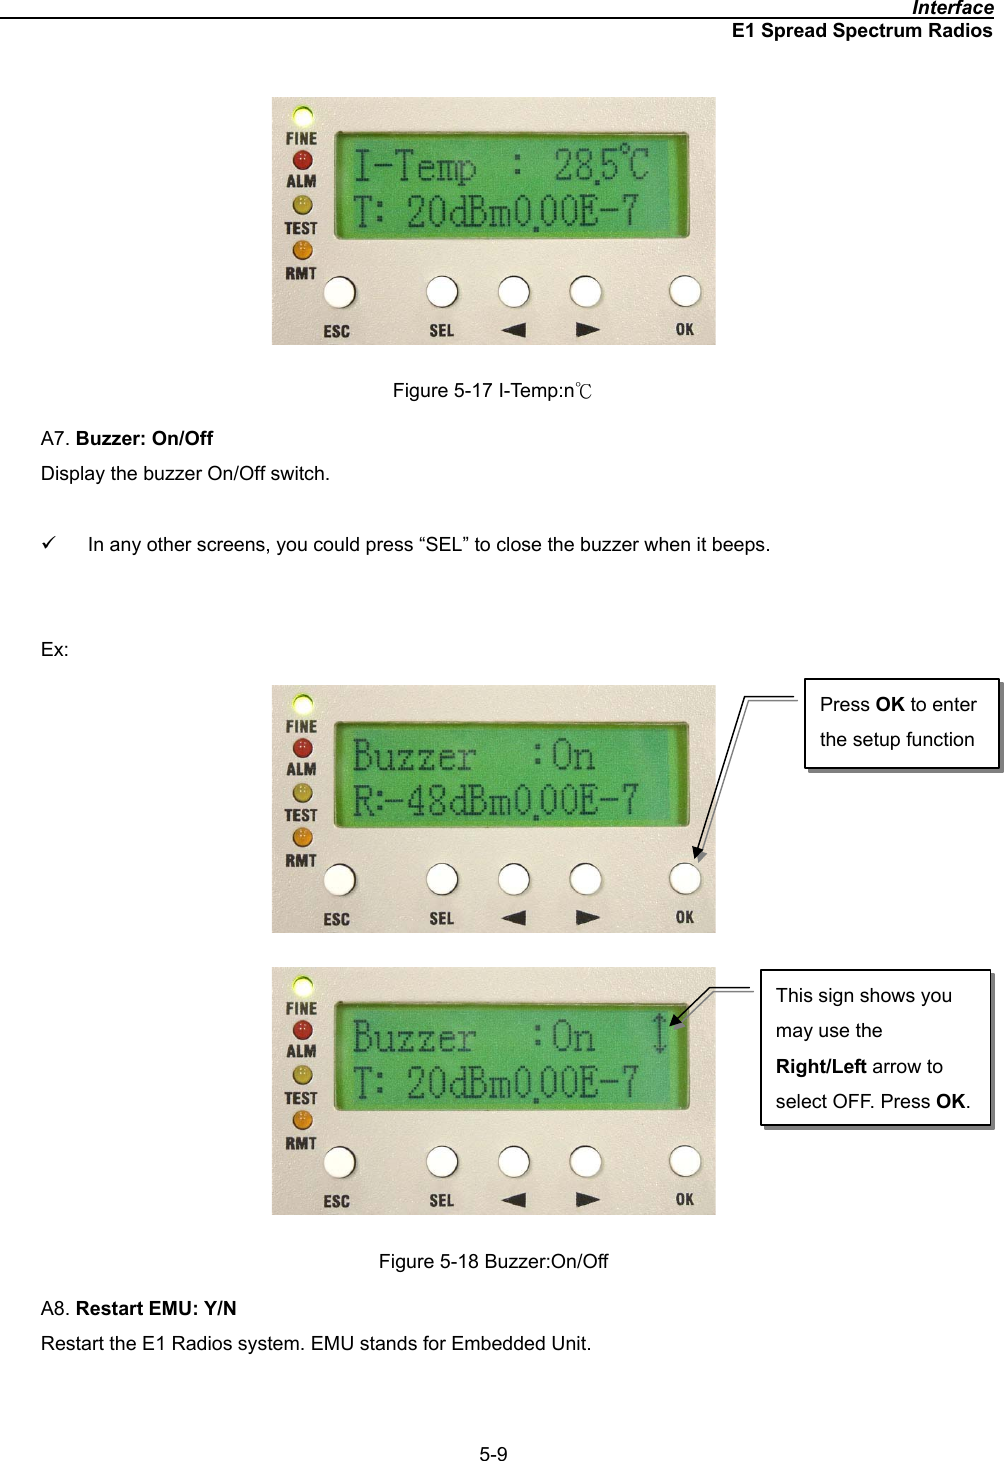                                                                                              InterfaceE1 Spread Spectrum Radios5-9Figure 5-17 I-Temp:nкA7. Buzzer: On/OffDisplay the buzzer On/Off switch.   9  In any other screens, you could press “SEL” to close the buzzer when it beeps.   Ex:Figure 5-18 Buzzer:On/Off A8. Restart EMU: Y/NRestart the E1 Radios system. EMU stands for Embedded Unit. Press OK to enter the setup function This sign shows you may use the Right/Left arrow to select OFF. Press OK.